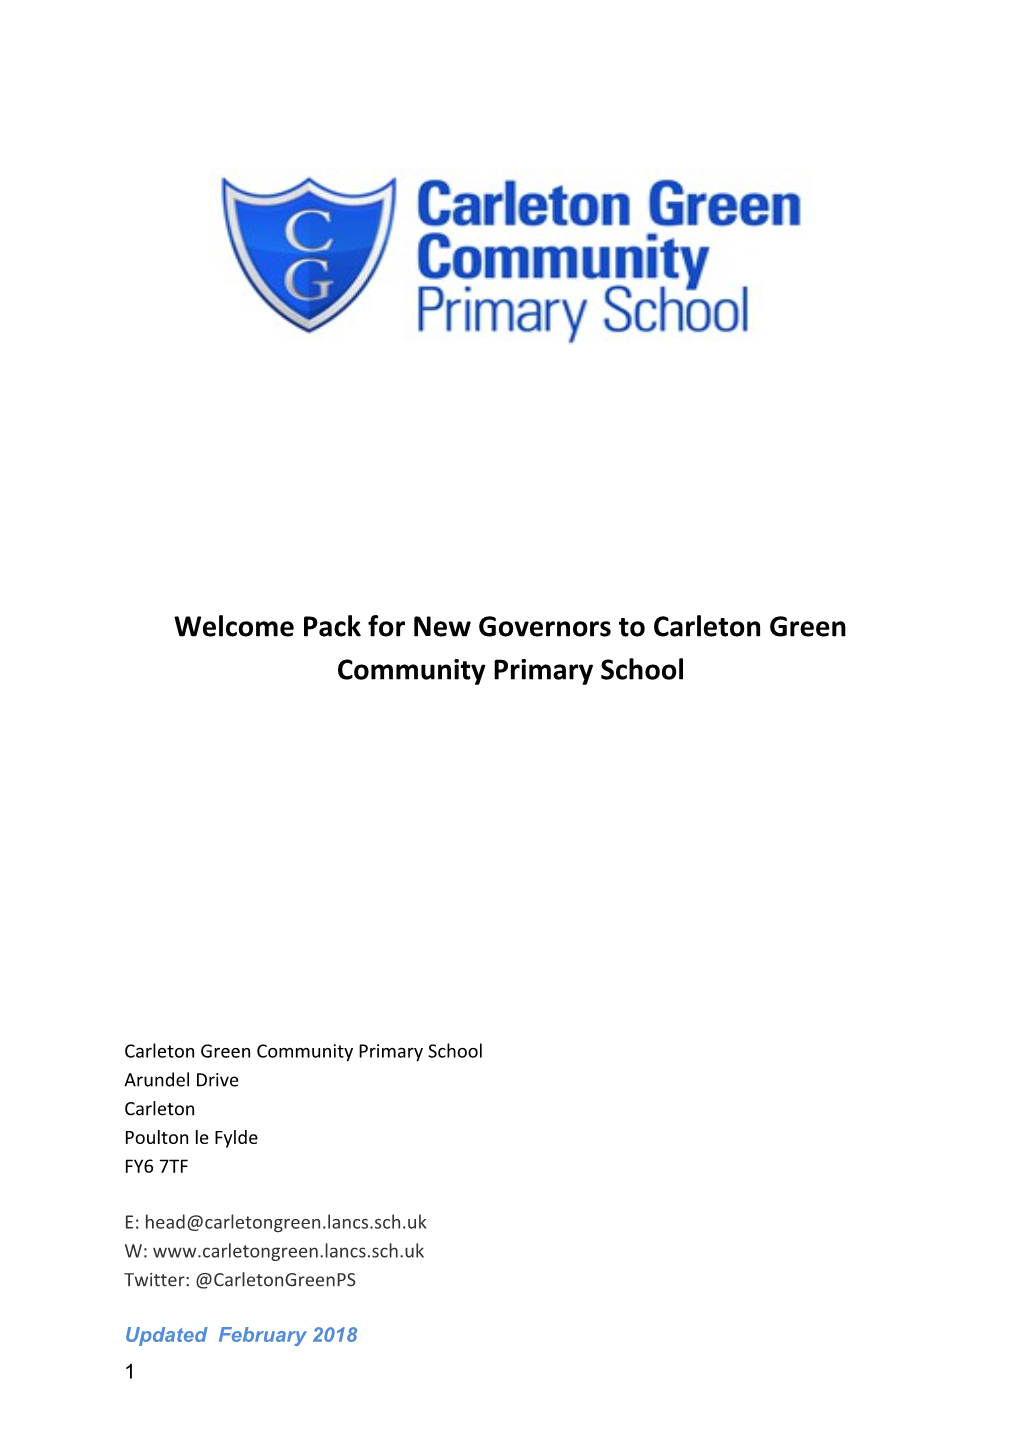 Welcome Pack for New Governors to Carleton Green Community Primary School